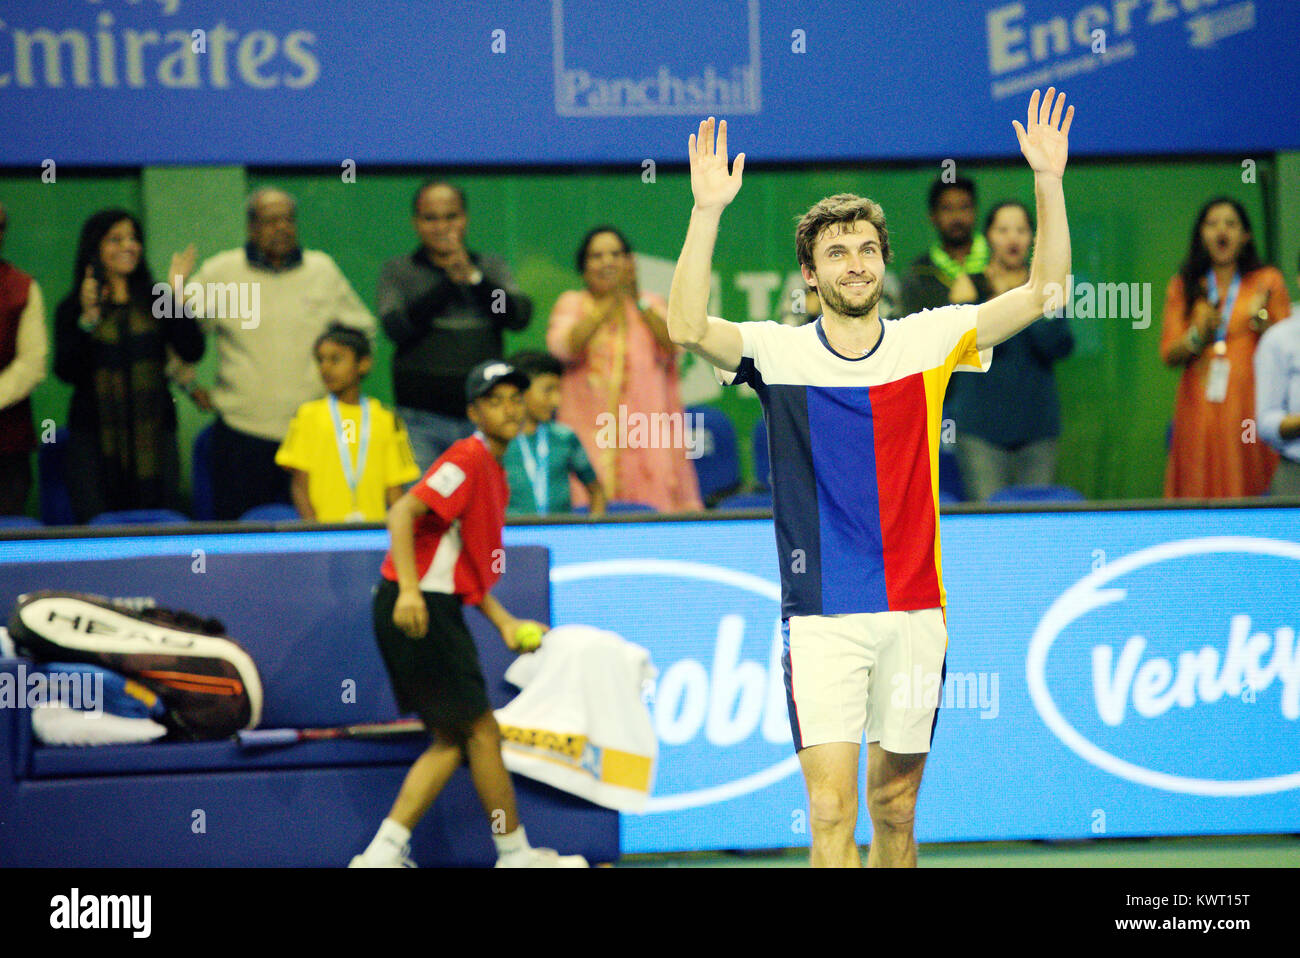 Pune, India. 5th January 2018. Gilles Simon of France gestures to the crowd after winning his semi-final match at the Tata Open Maharashtra tournament at the Mahalunge Balewadi Tennis Stadium in Pune, India. Credit: Karunesh Johri/Alamy Live News. Stock Photo